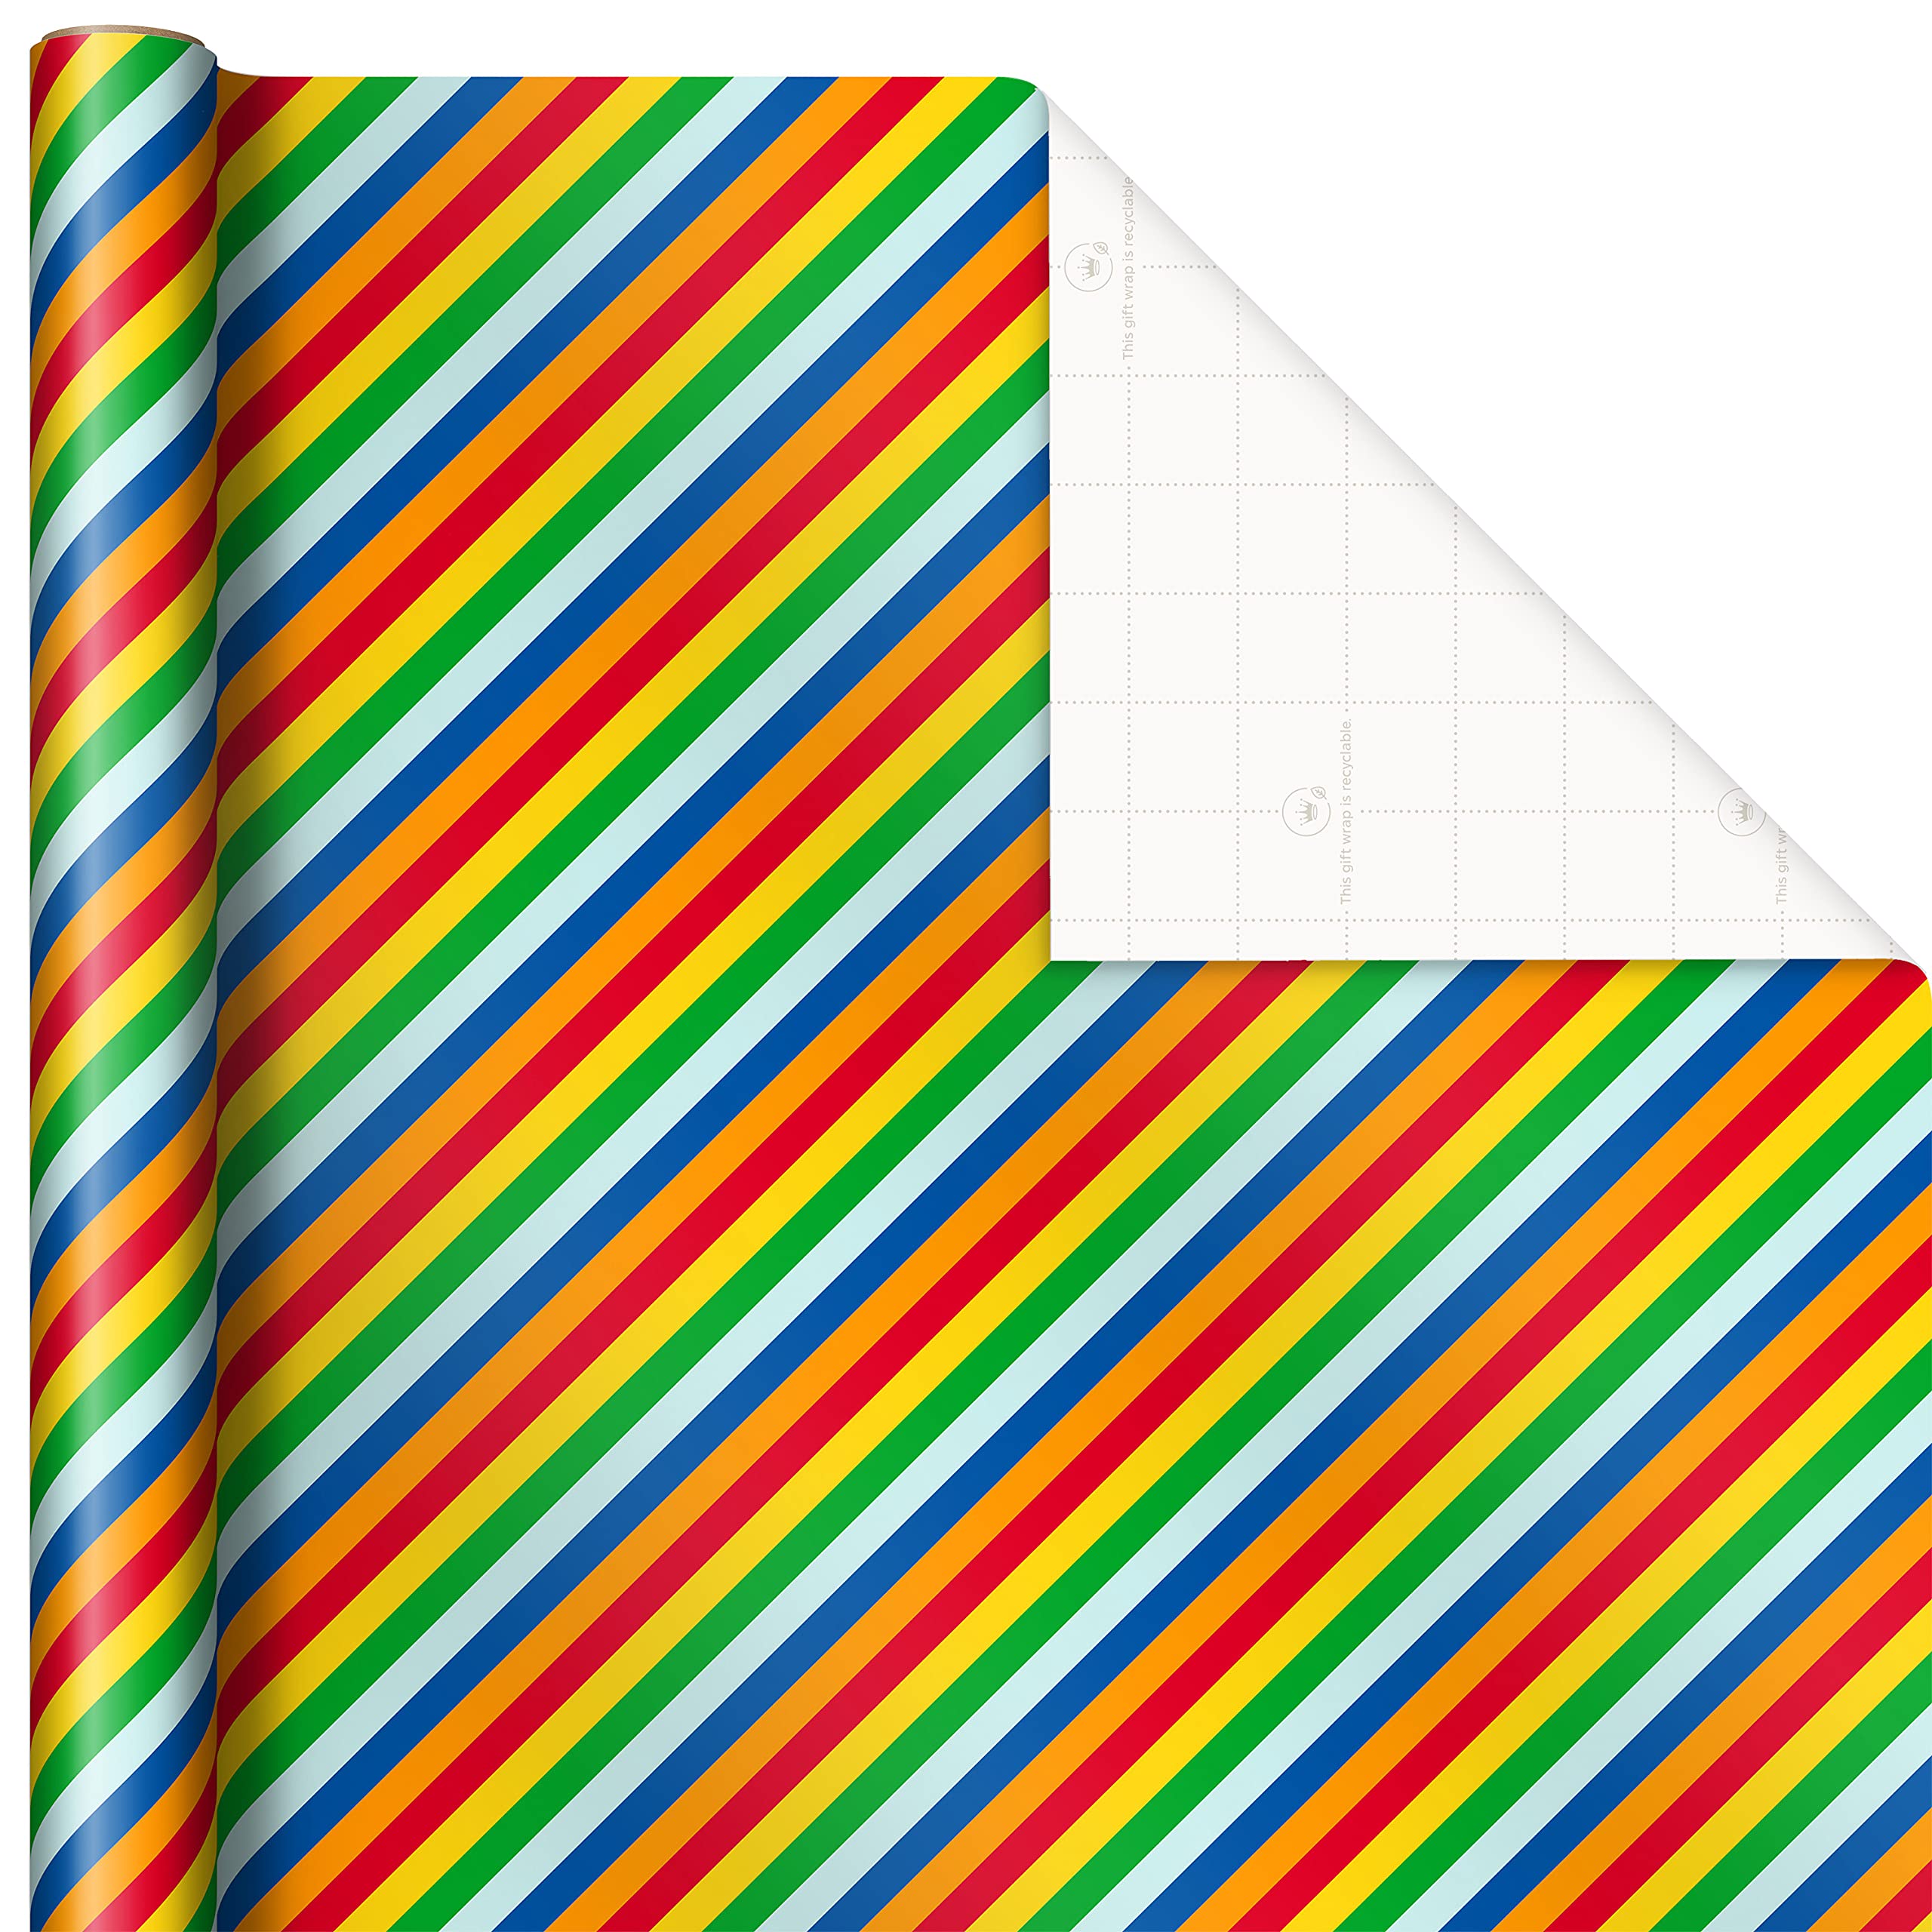 Hallmark Birthday Wrapping Paper Set (3 Rolls: 90 Sq. Ft. Ttl, 10 Bows, Ribbon, Gift Tag Stickers) Rainbow Stripes, Cake, Happy Birthday for Kids and Adults